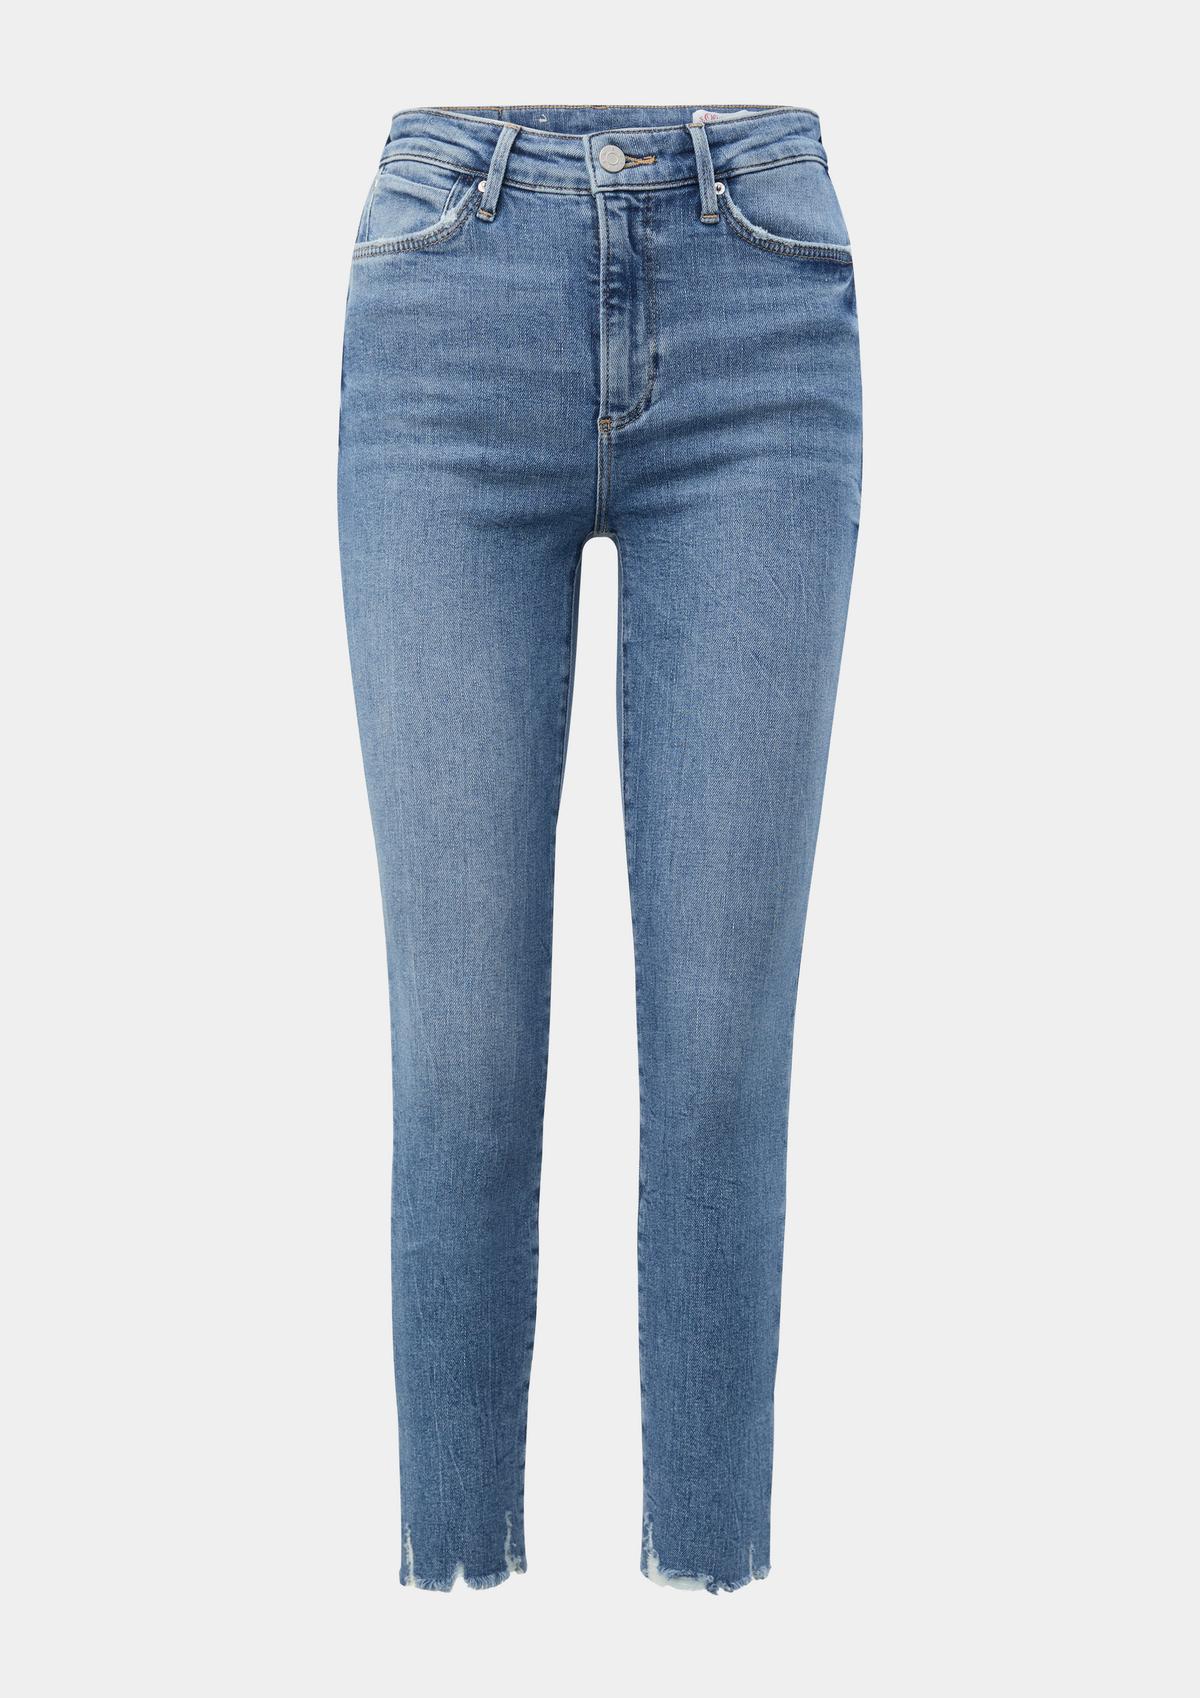 Izabell Ankle Jeans / Fit Leg Rise - Mid blue / Cotton / / Skinny Stretch Skinny